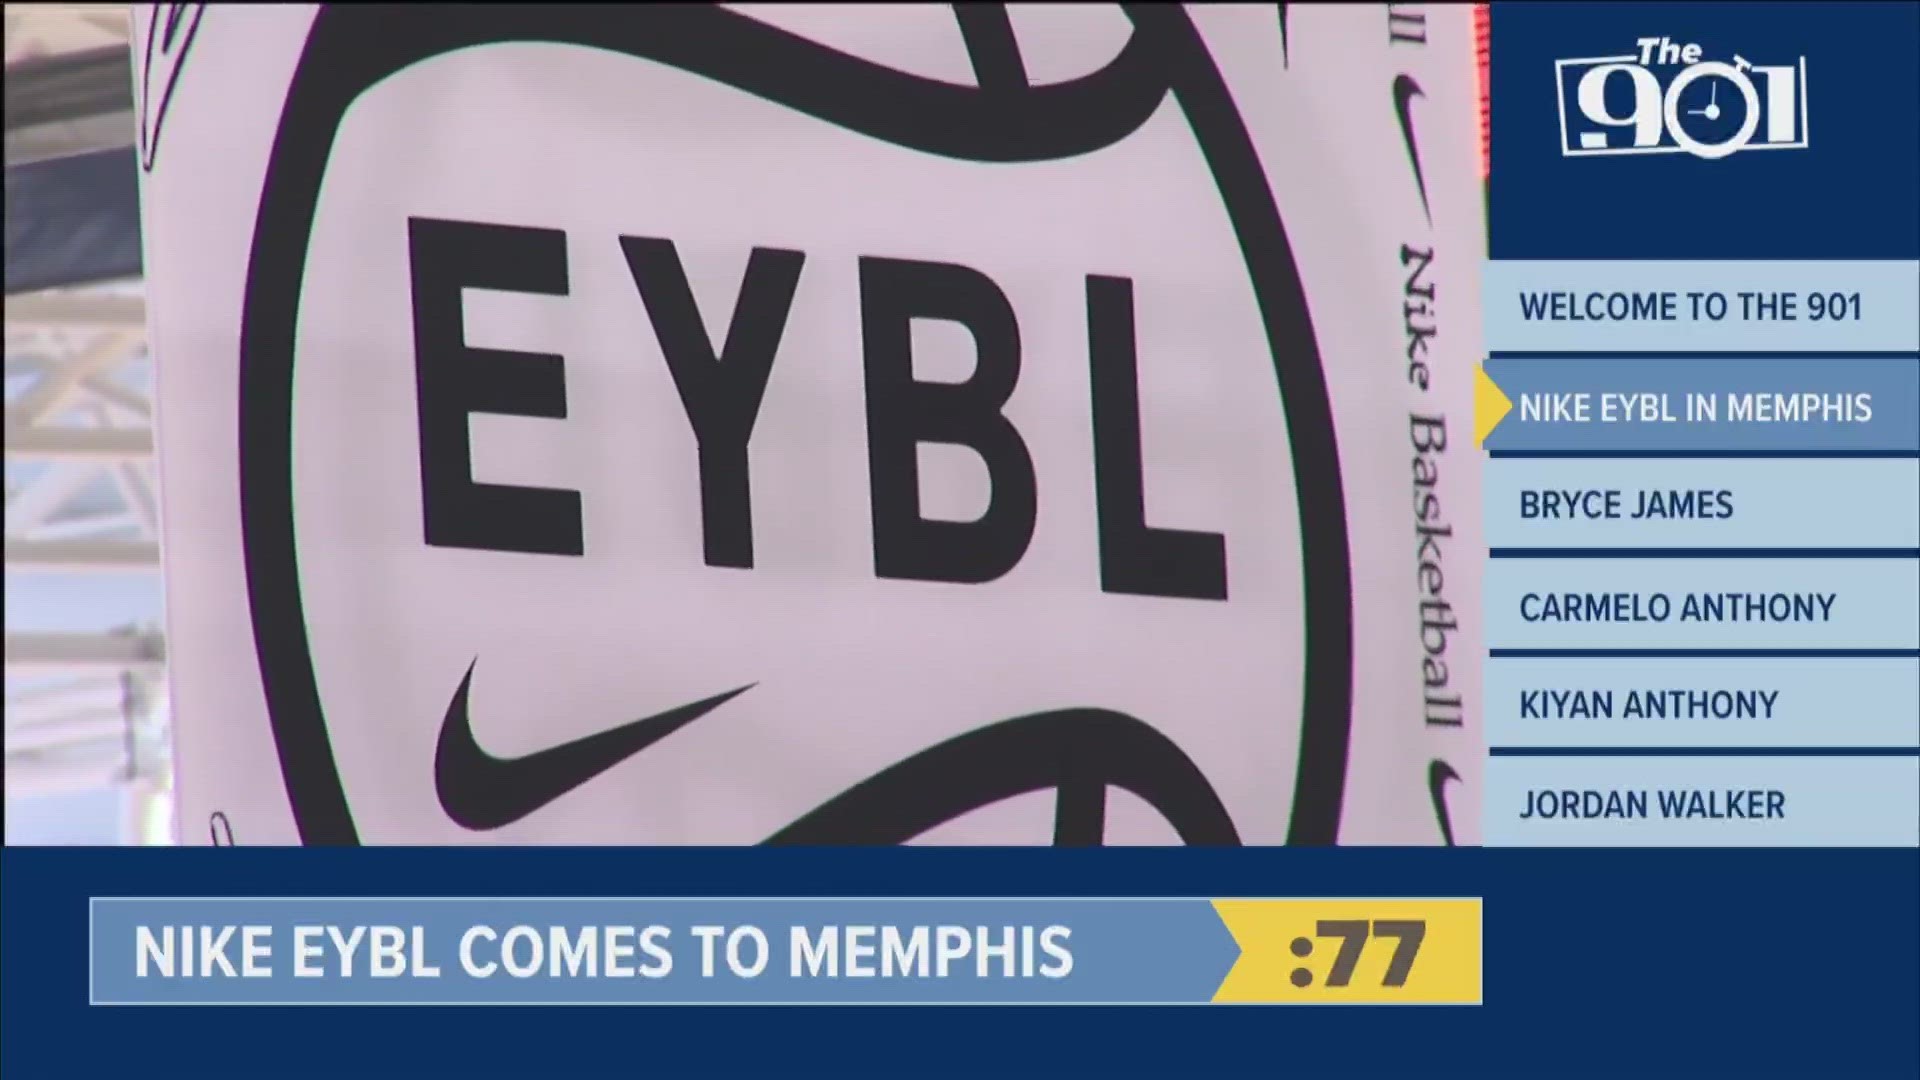 Clayton Collier gets you up to speed on everything Memphis-sports in "The 901."